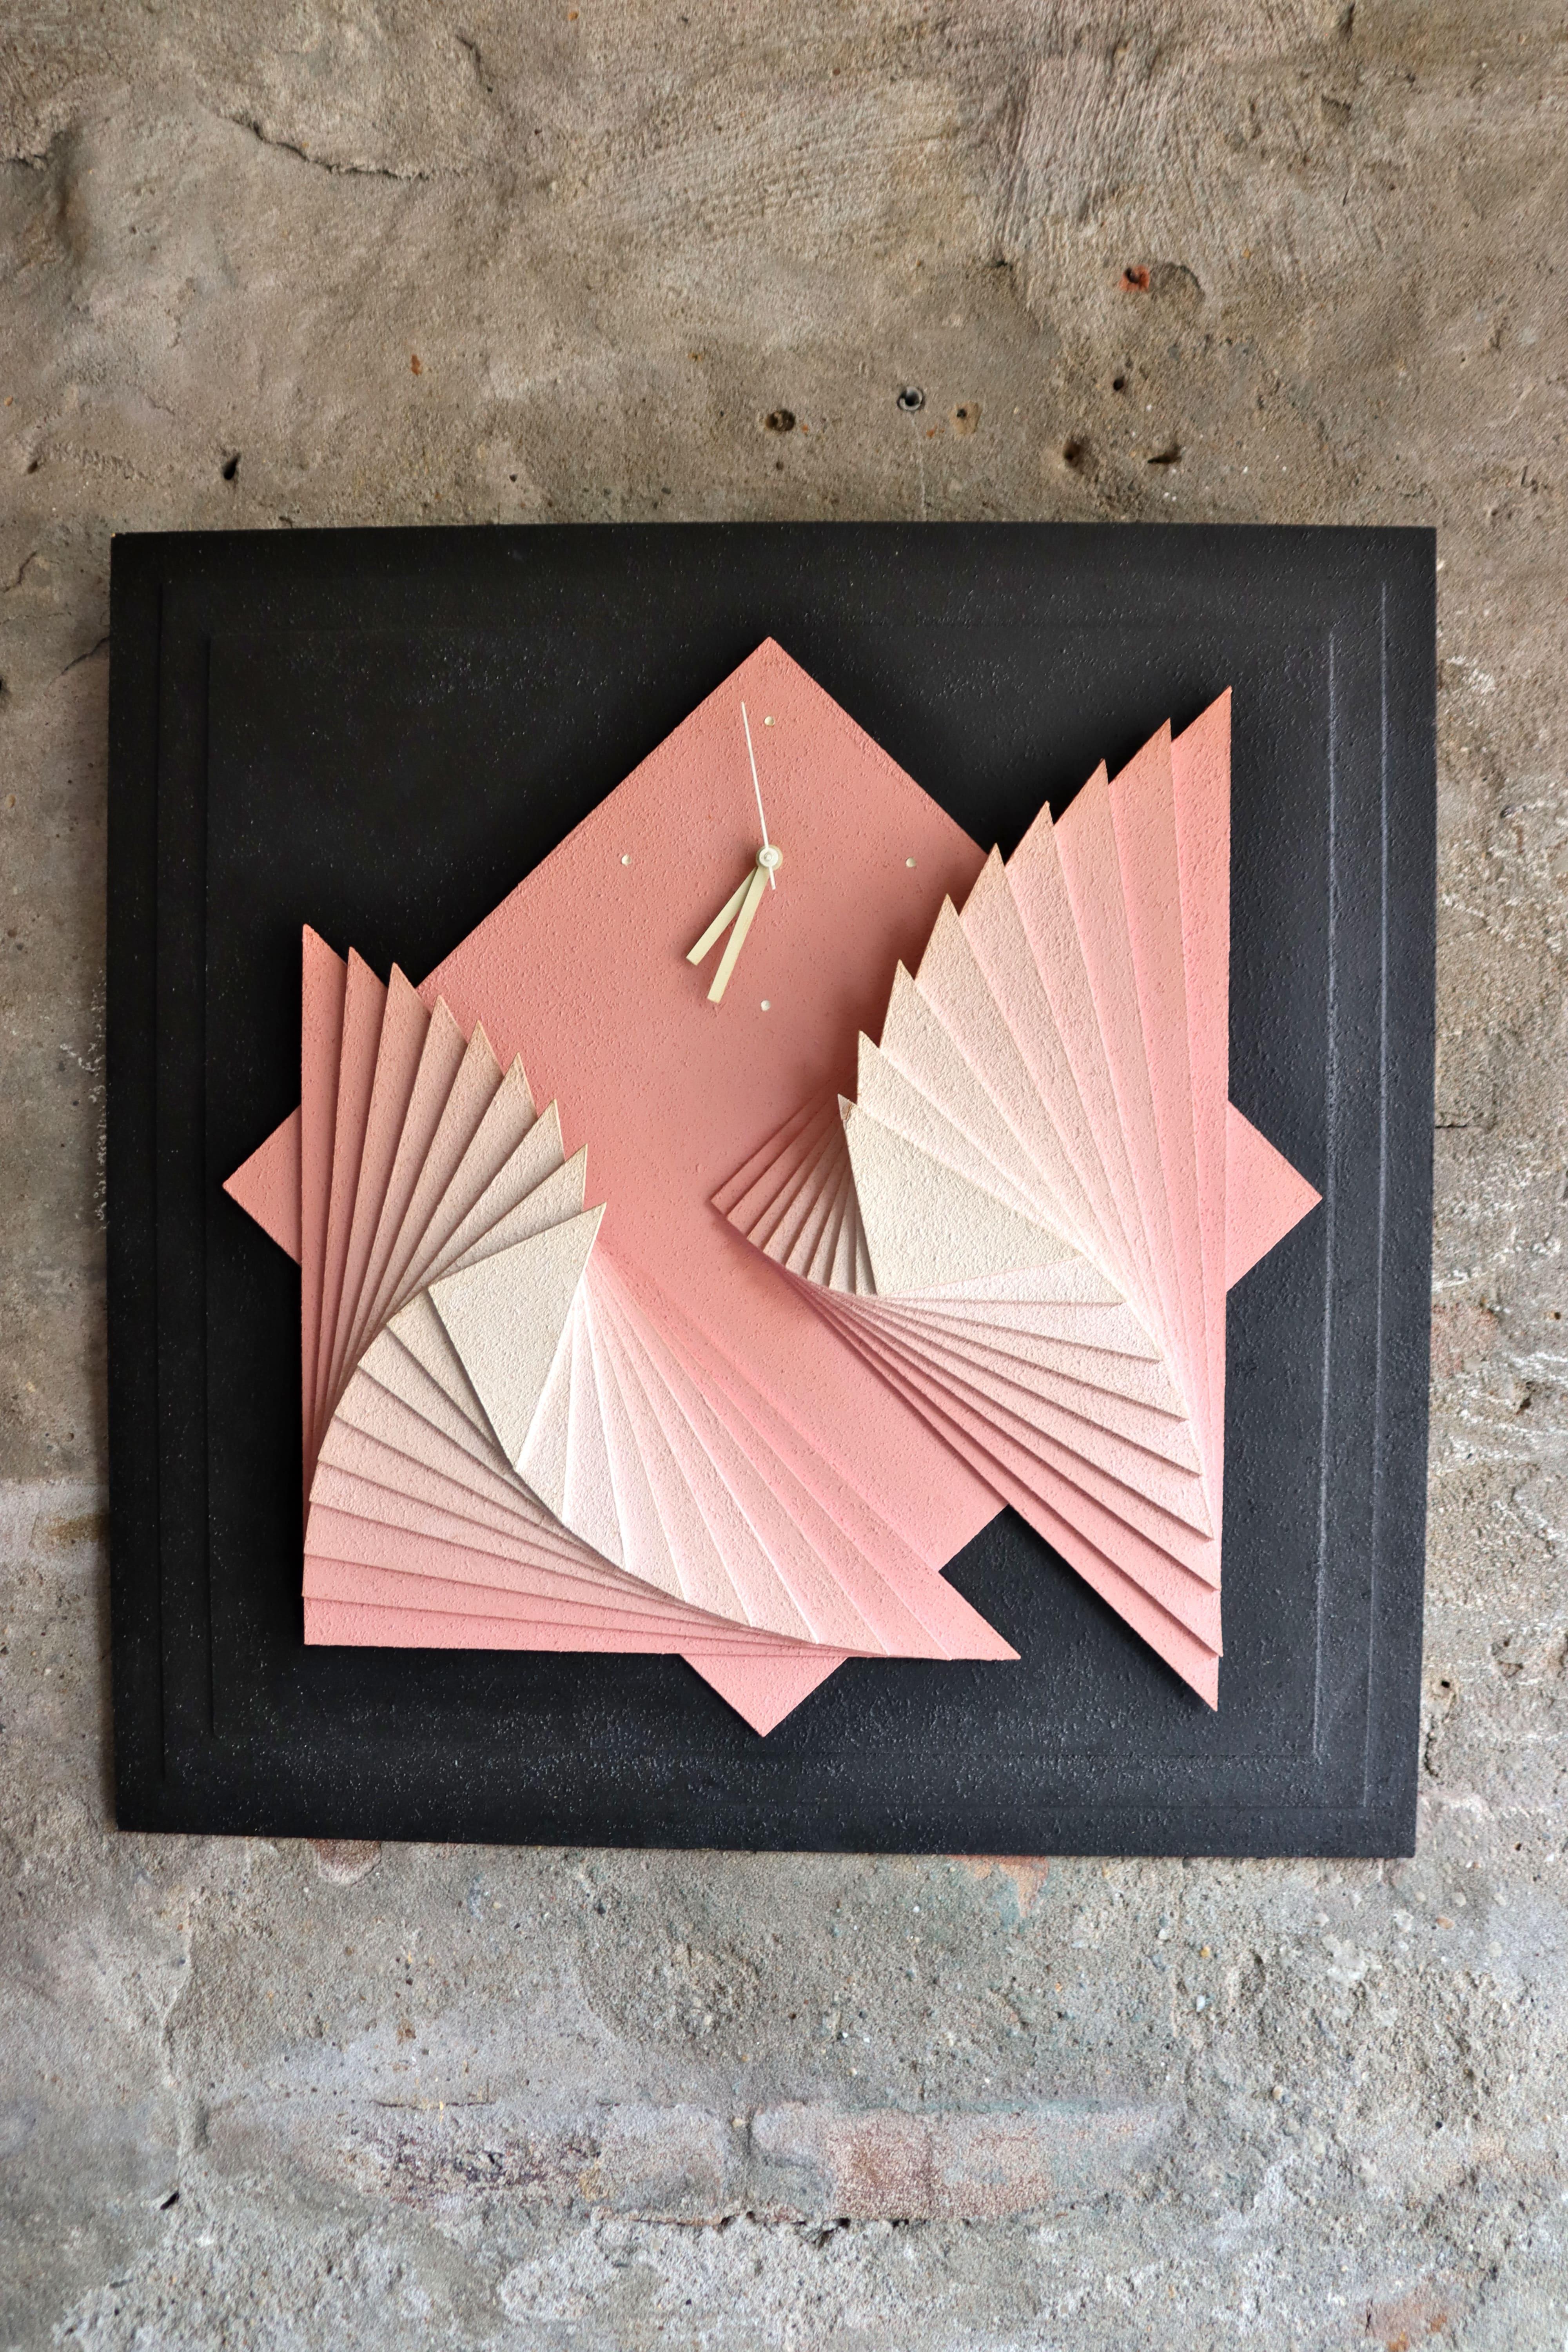 This cool mirror has a nice memphis vibe. It probably dates from the 1980s, but we can’t find any information that. It looks handmade and is still in very good condition. There’s a small chip on one of the triangles.

